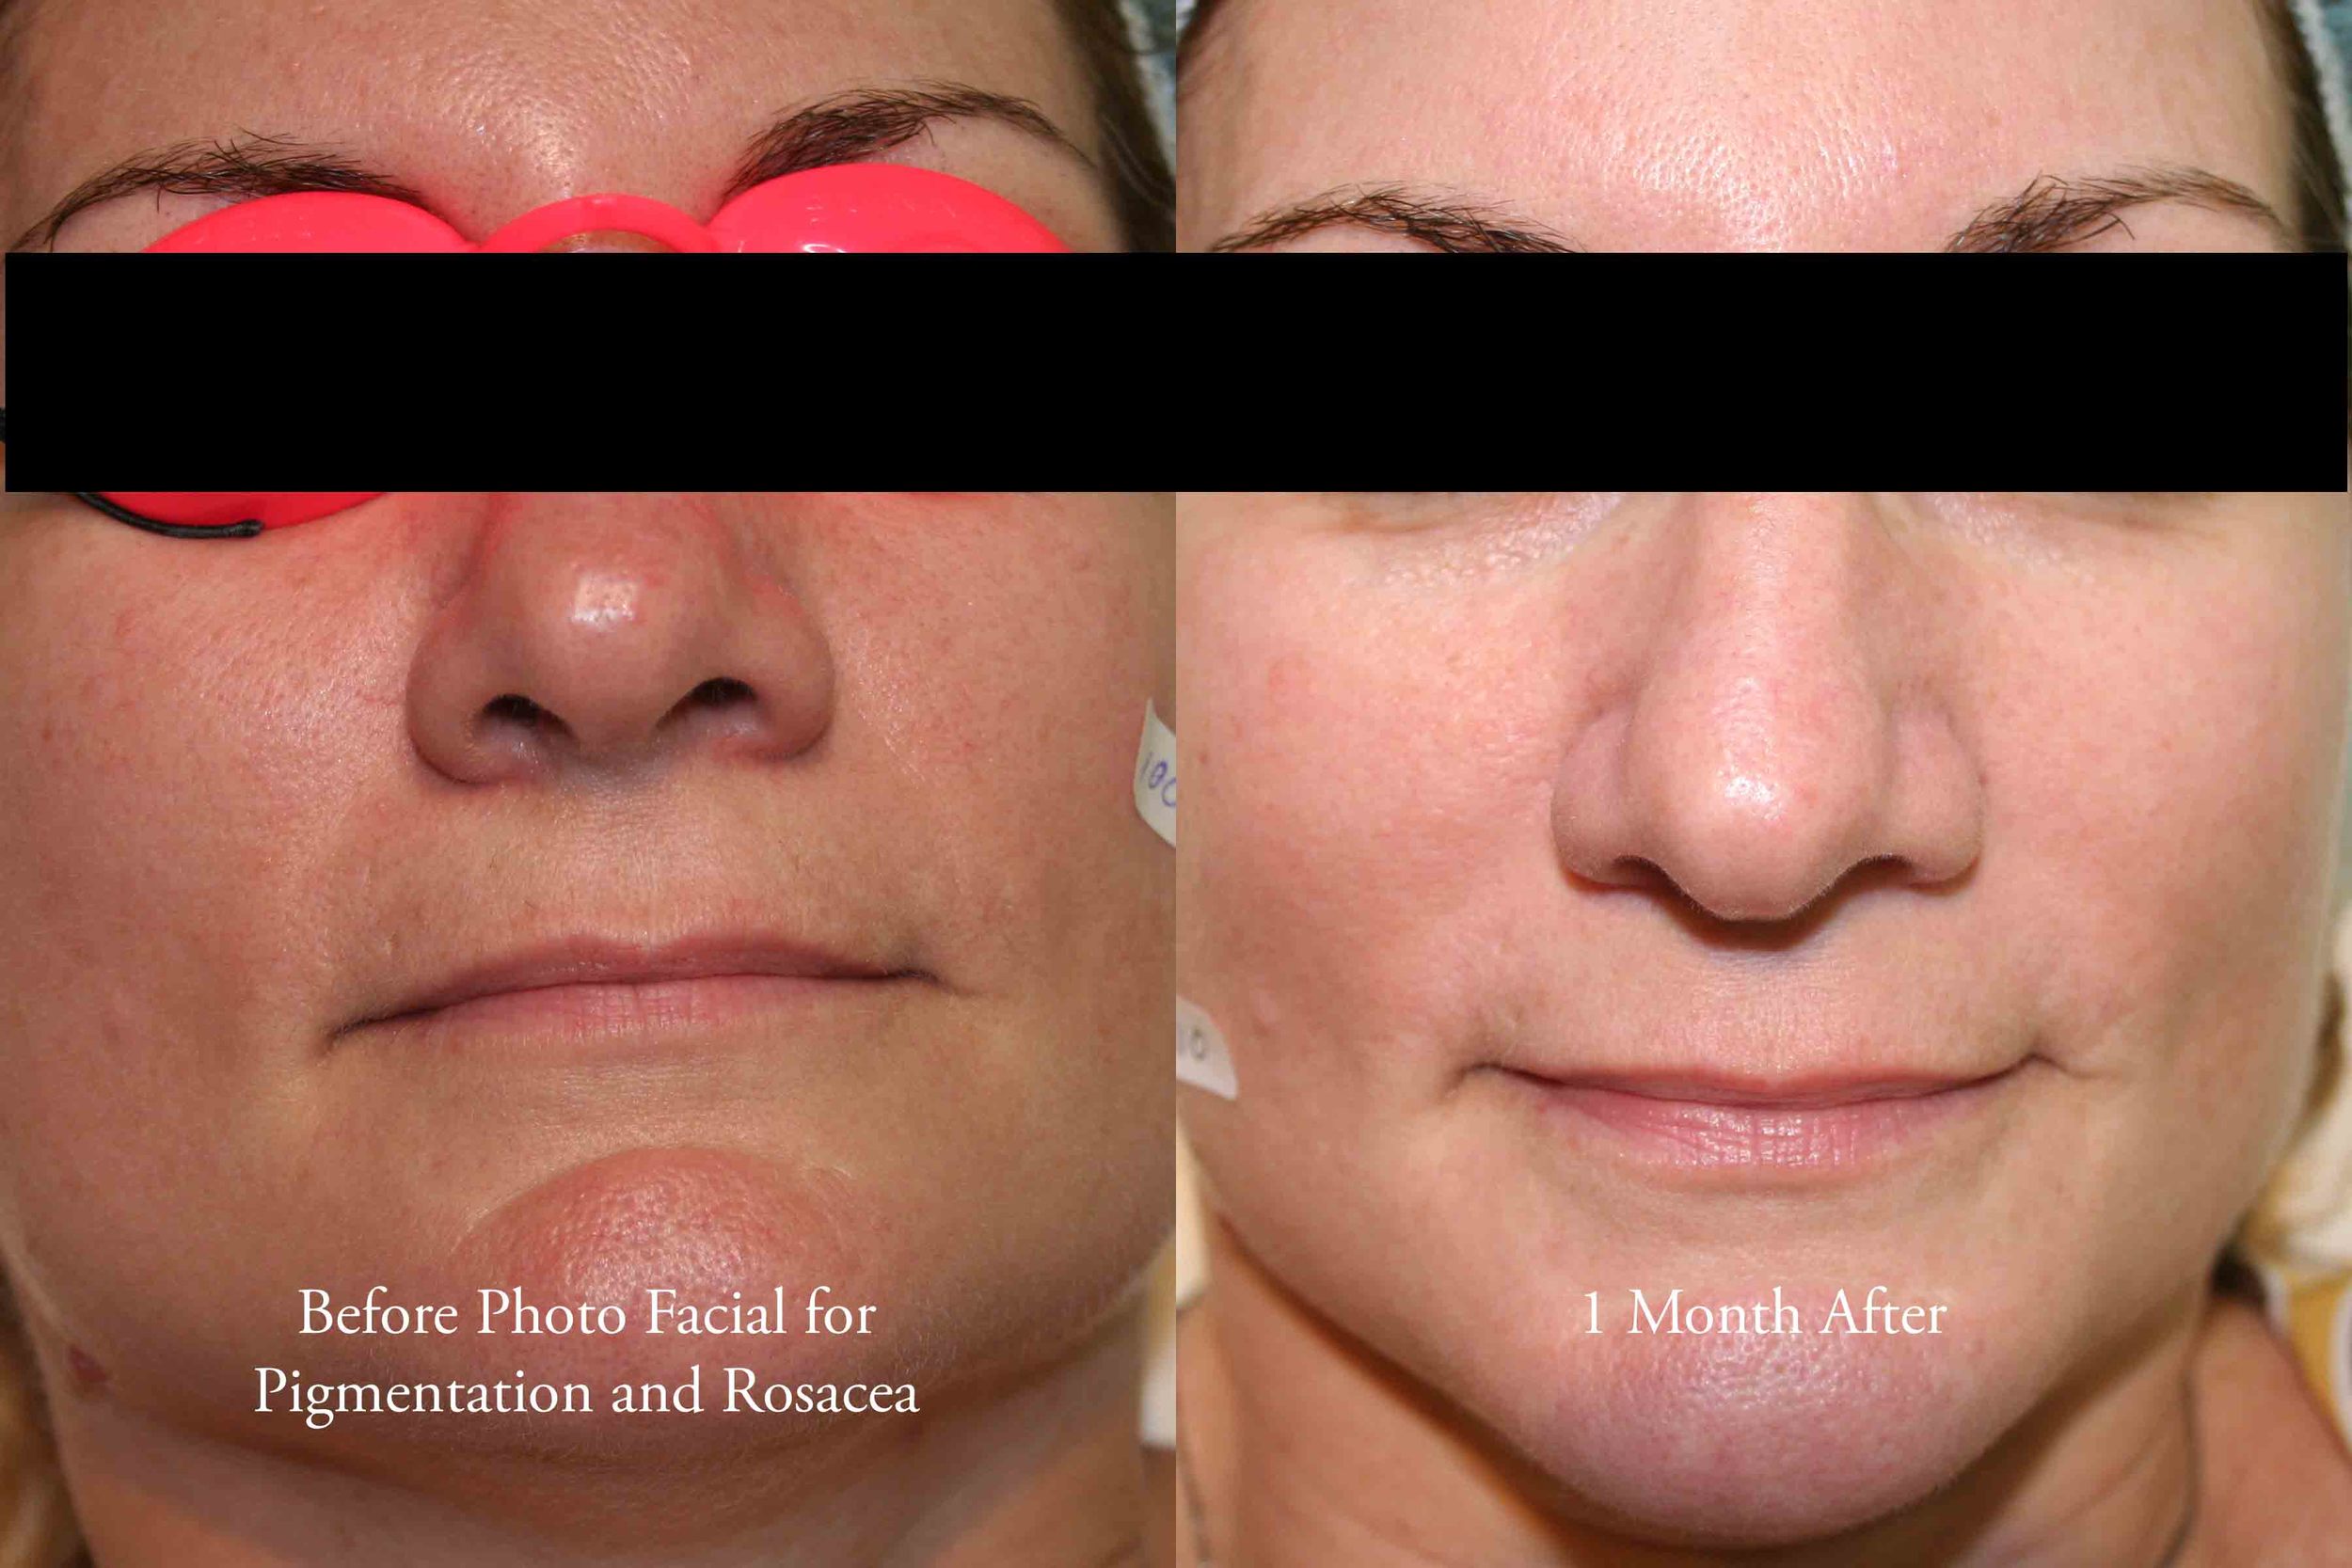 photo facial for rosacea and pigmentation 1 - web.jpg